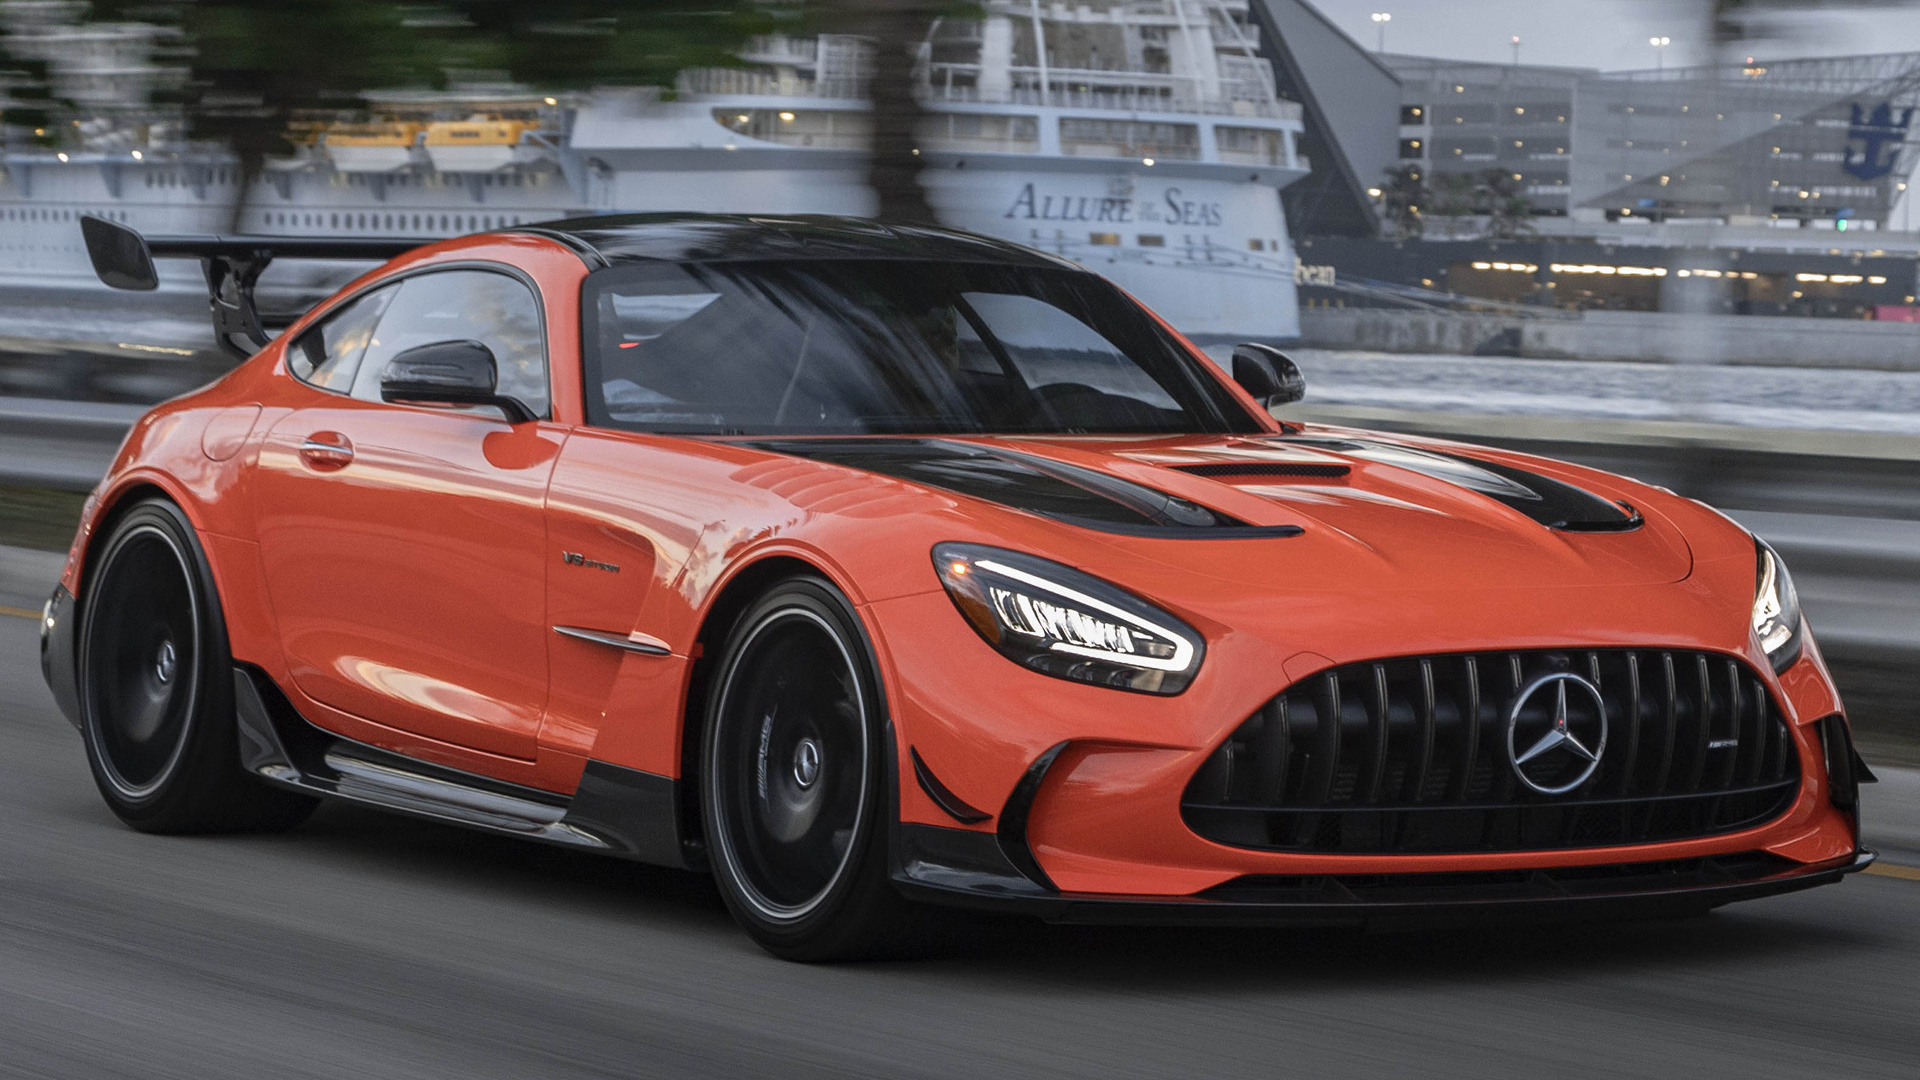 Mercedes AMG GT Black Series (US) And HD Image